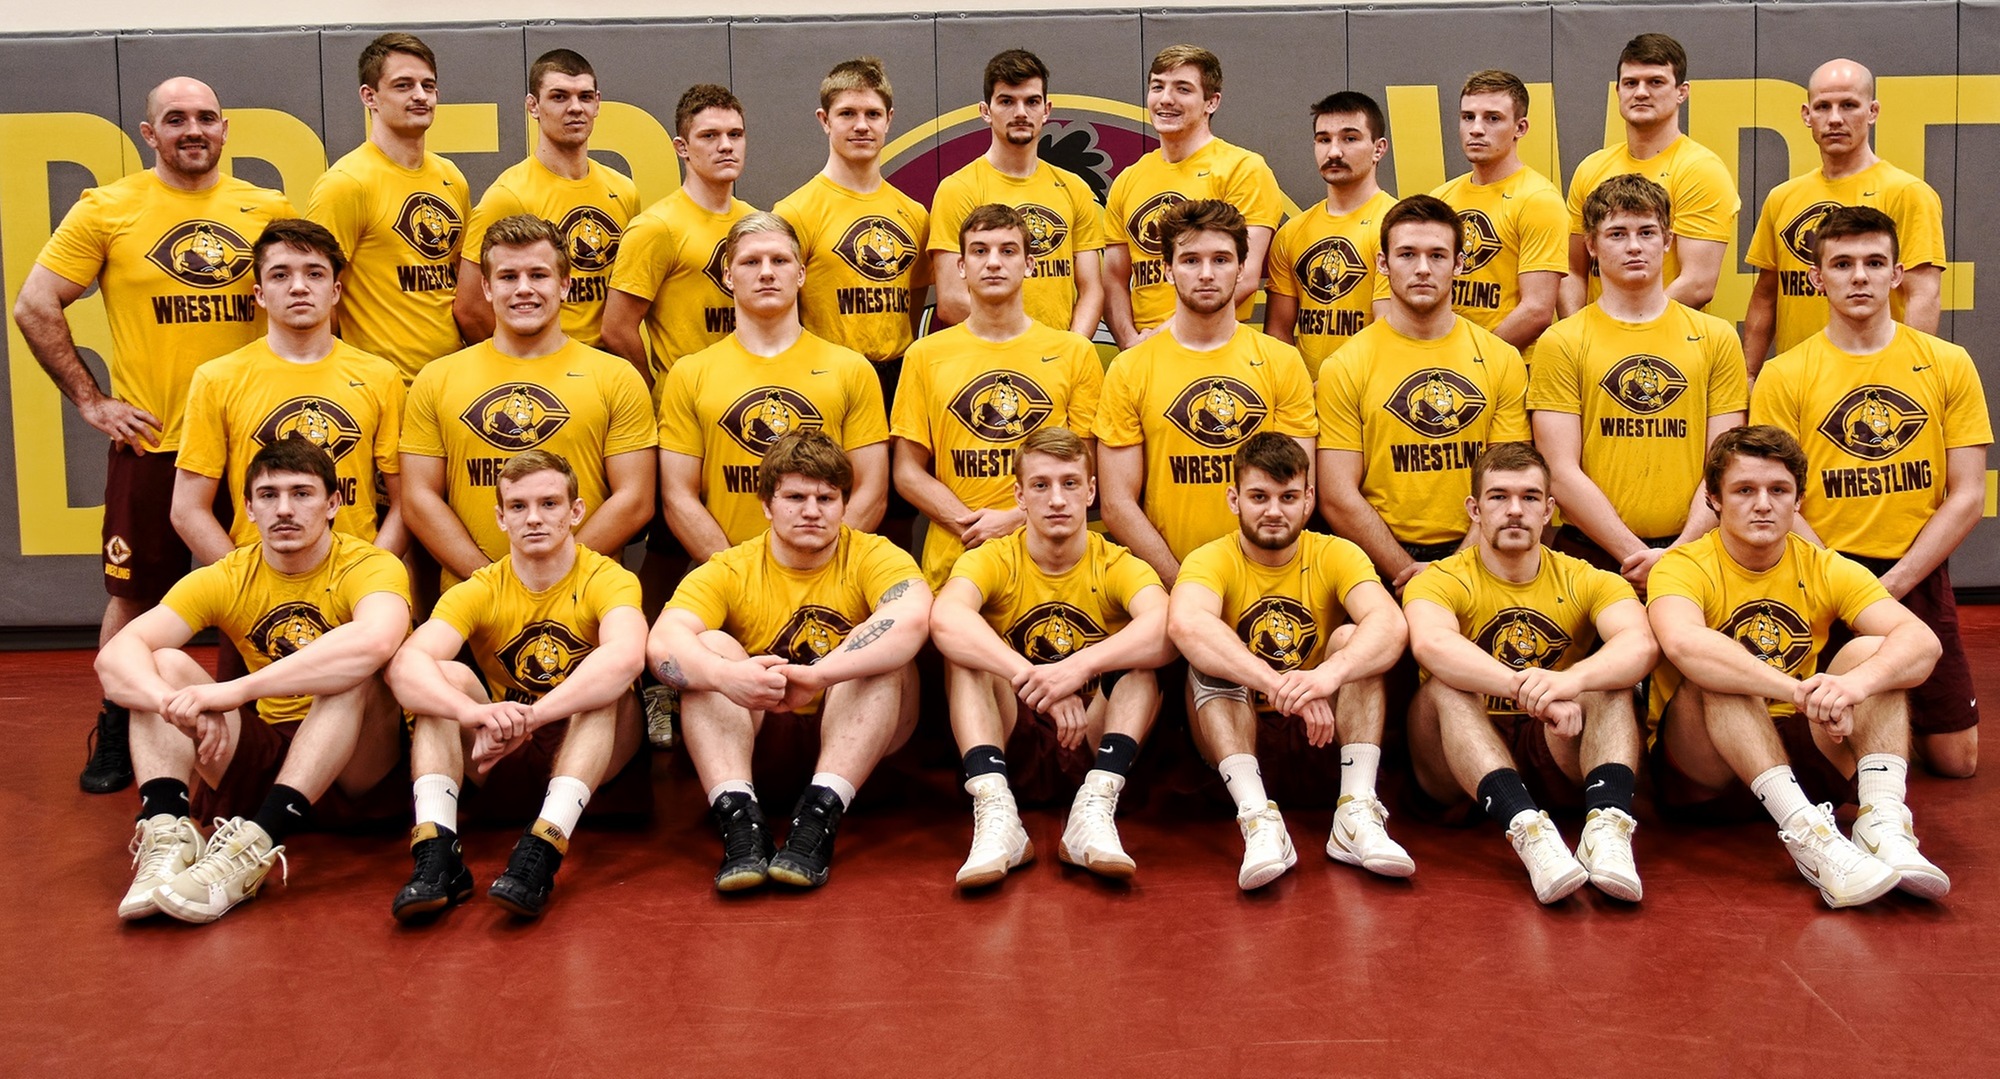 The Cobber wrestling team had a pair of national meet qualifiers, six place winners and finished in a tie for sixth place at the NCAA Regional Meet.